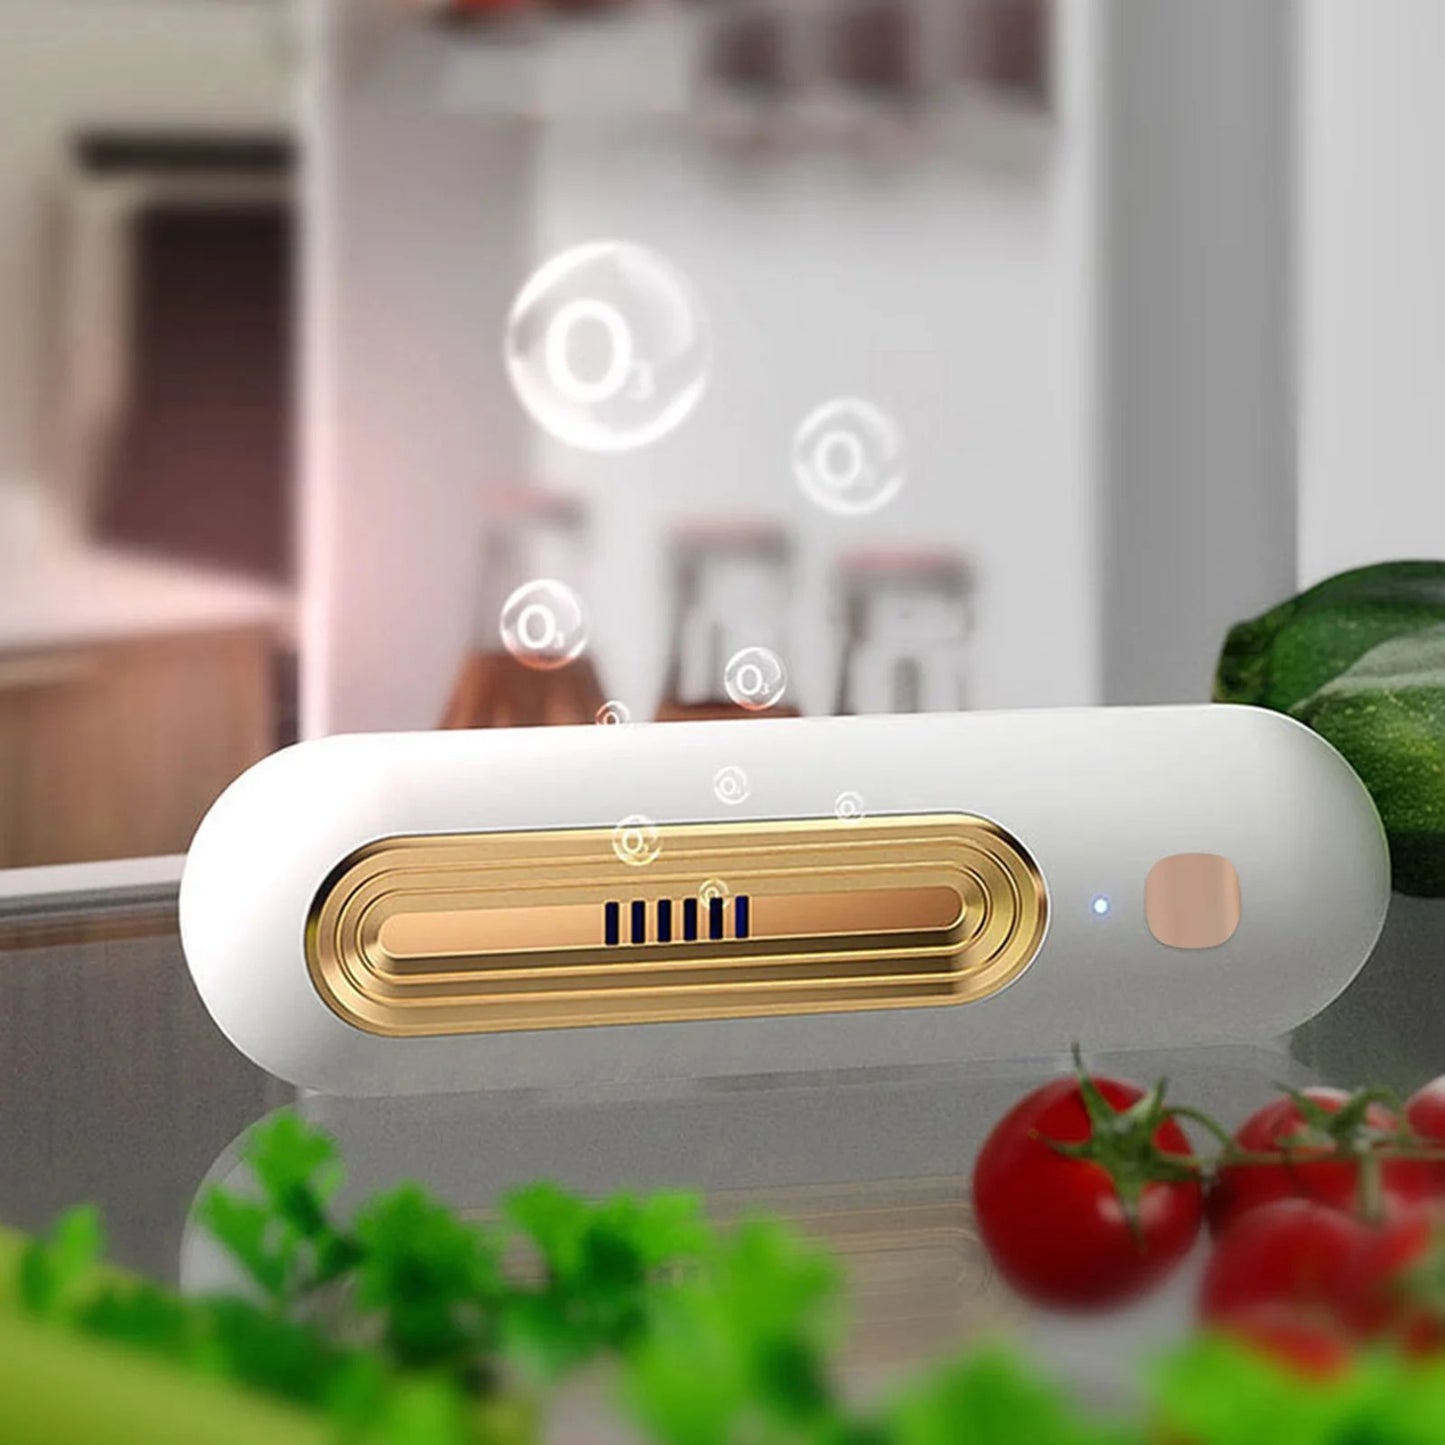 Fresh Air for Fresher Food: The Refrigerator Air Purifier